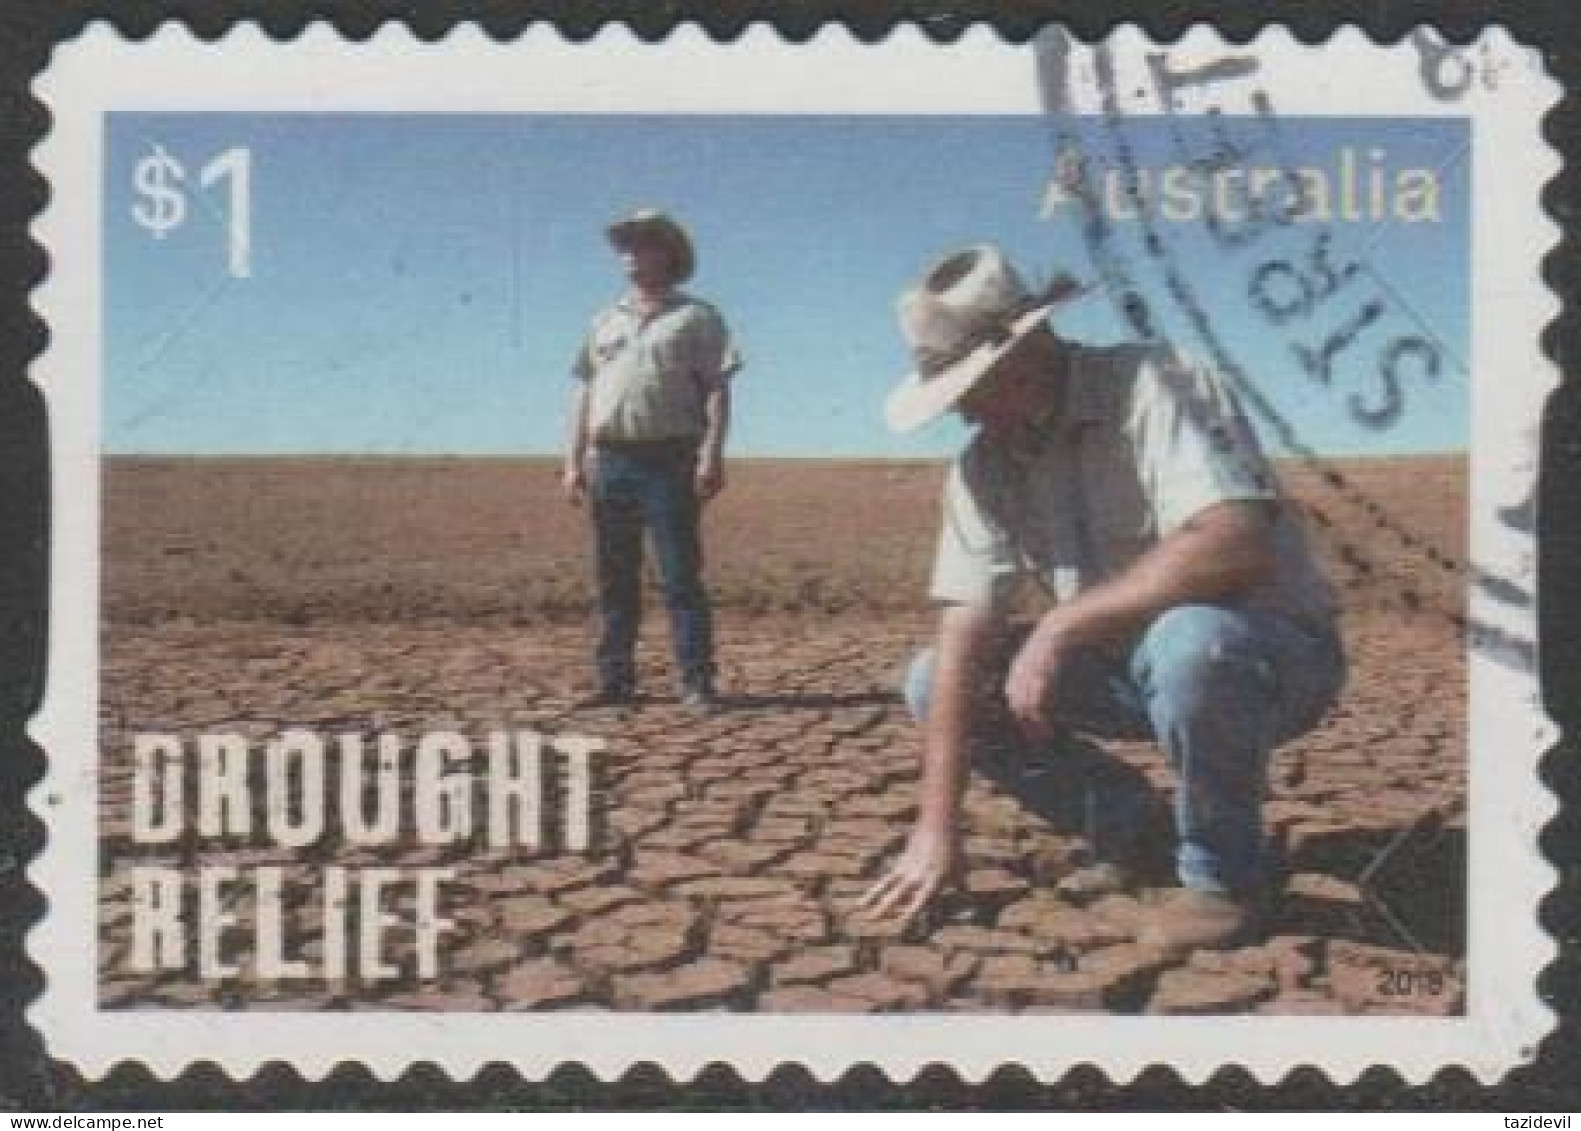 AUSTRALIA - DIE-CUT - USED - 2018 $1.00 Flood Relief - A Donation Was Made For Every Five Stamps Sold - Used Stamps